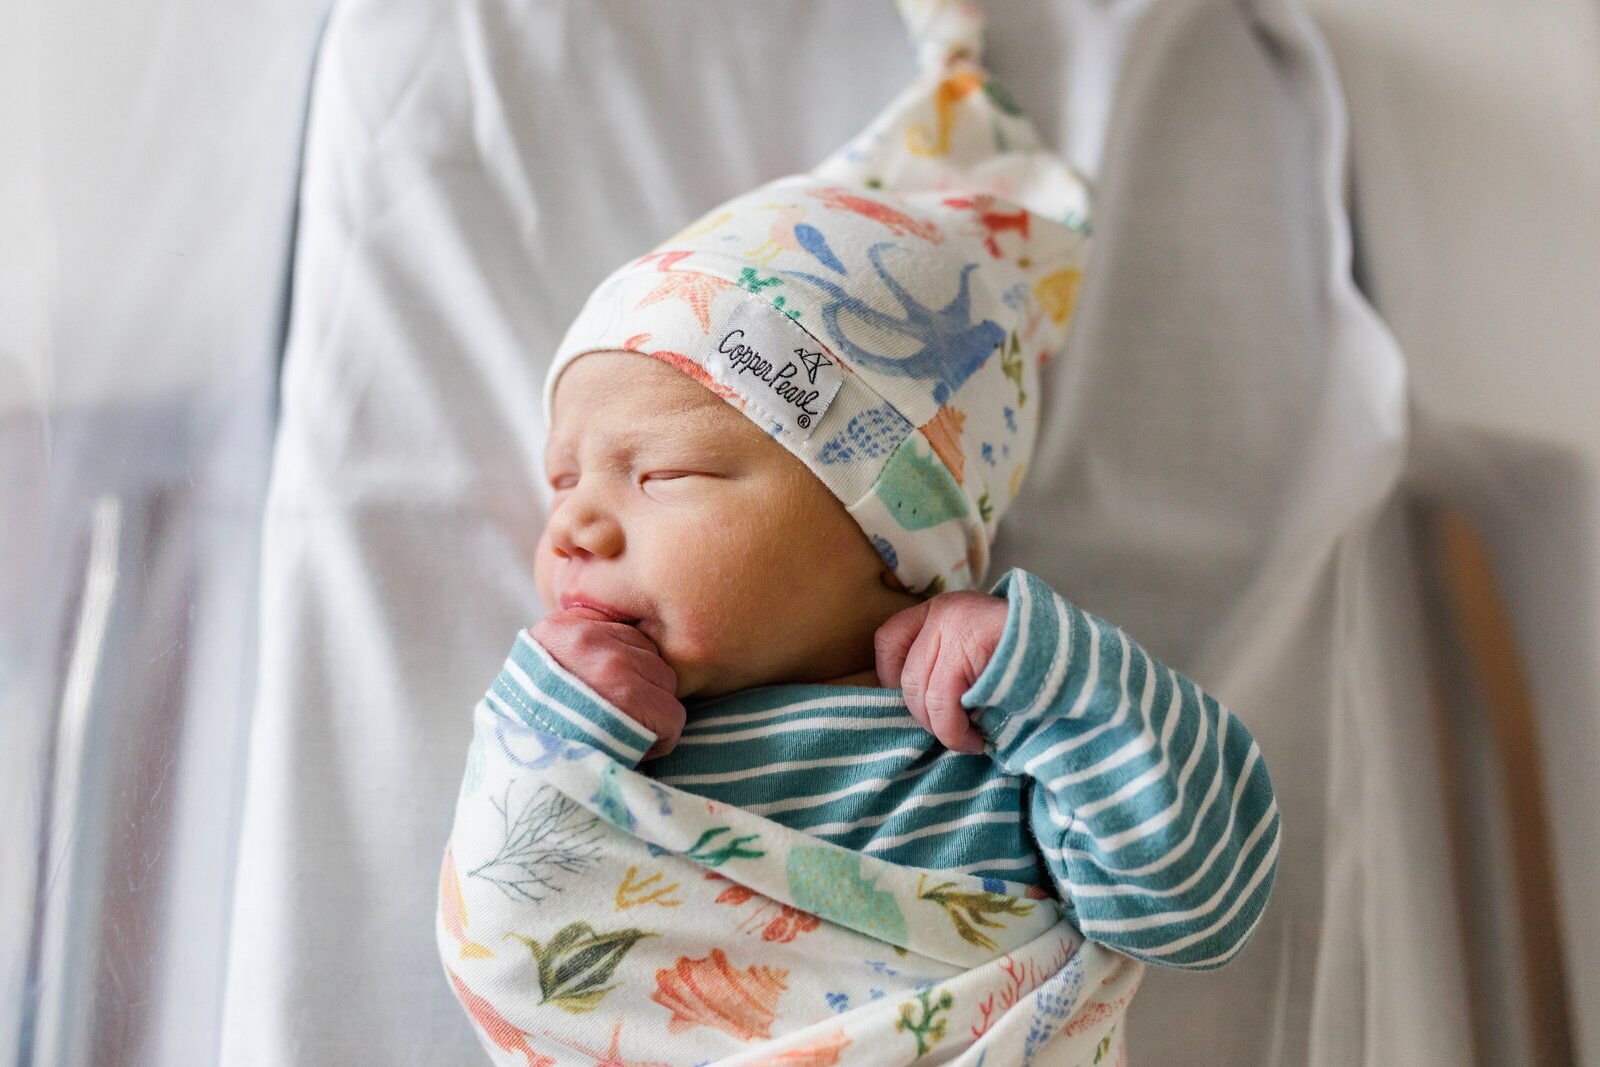 Newborn boy photo during fresh 48 newborn  session  in hospital. He's wearing Copper Pearl brand Nautical swaddle and hat.